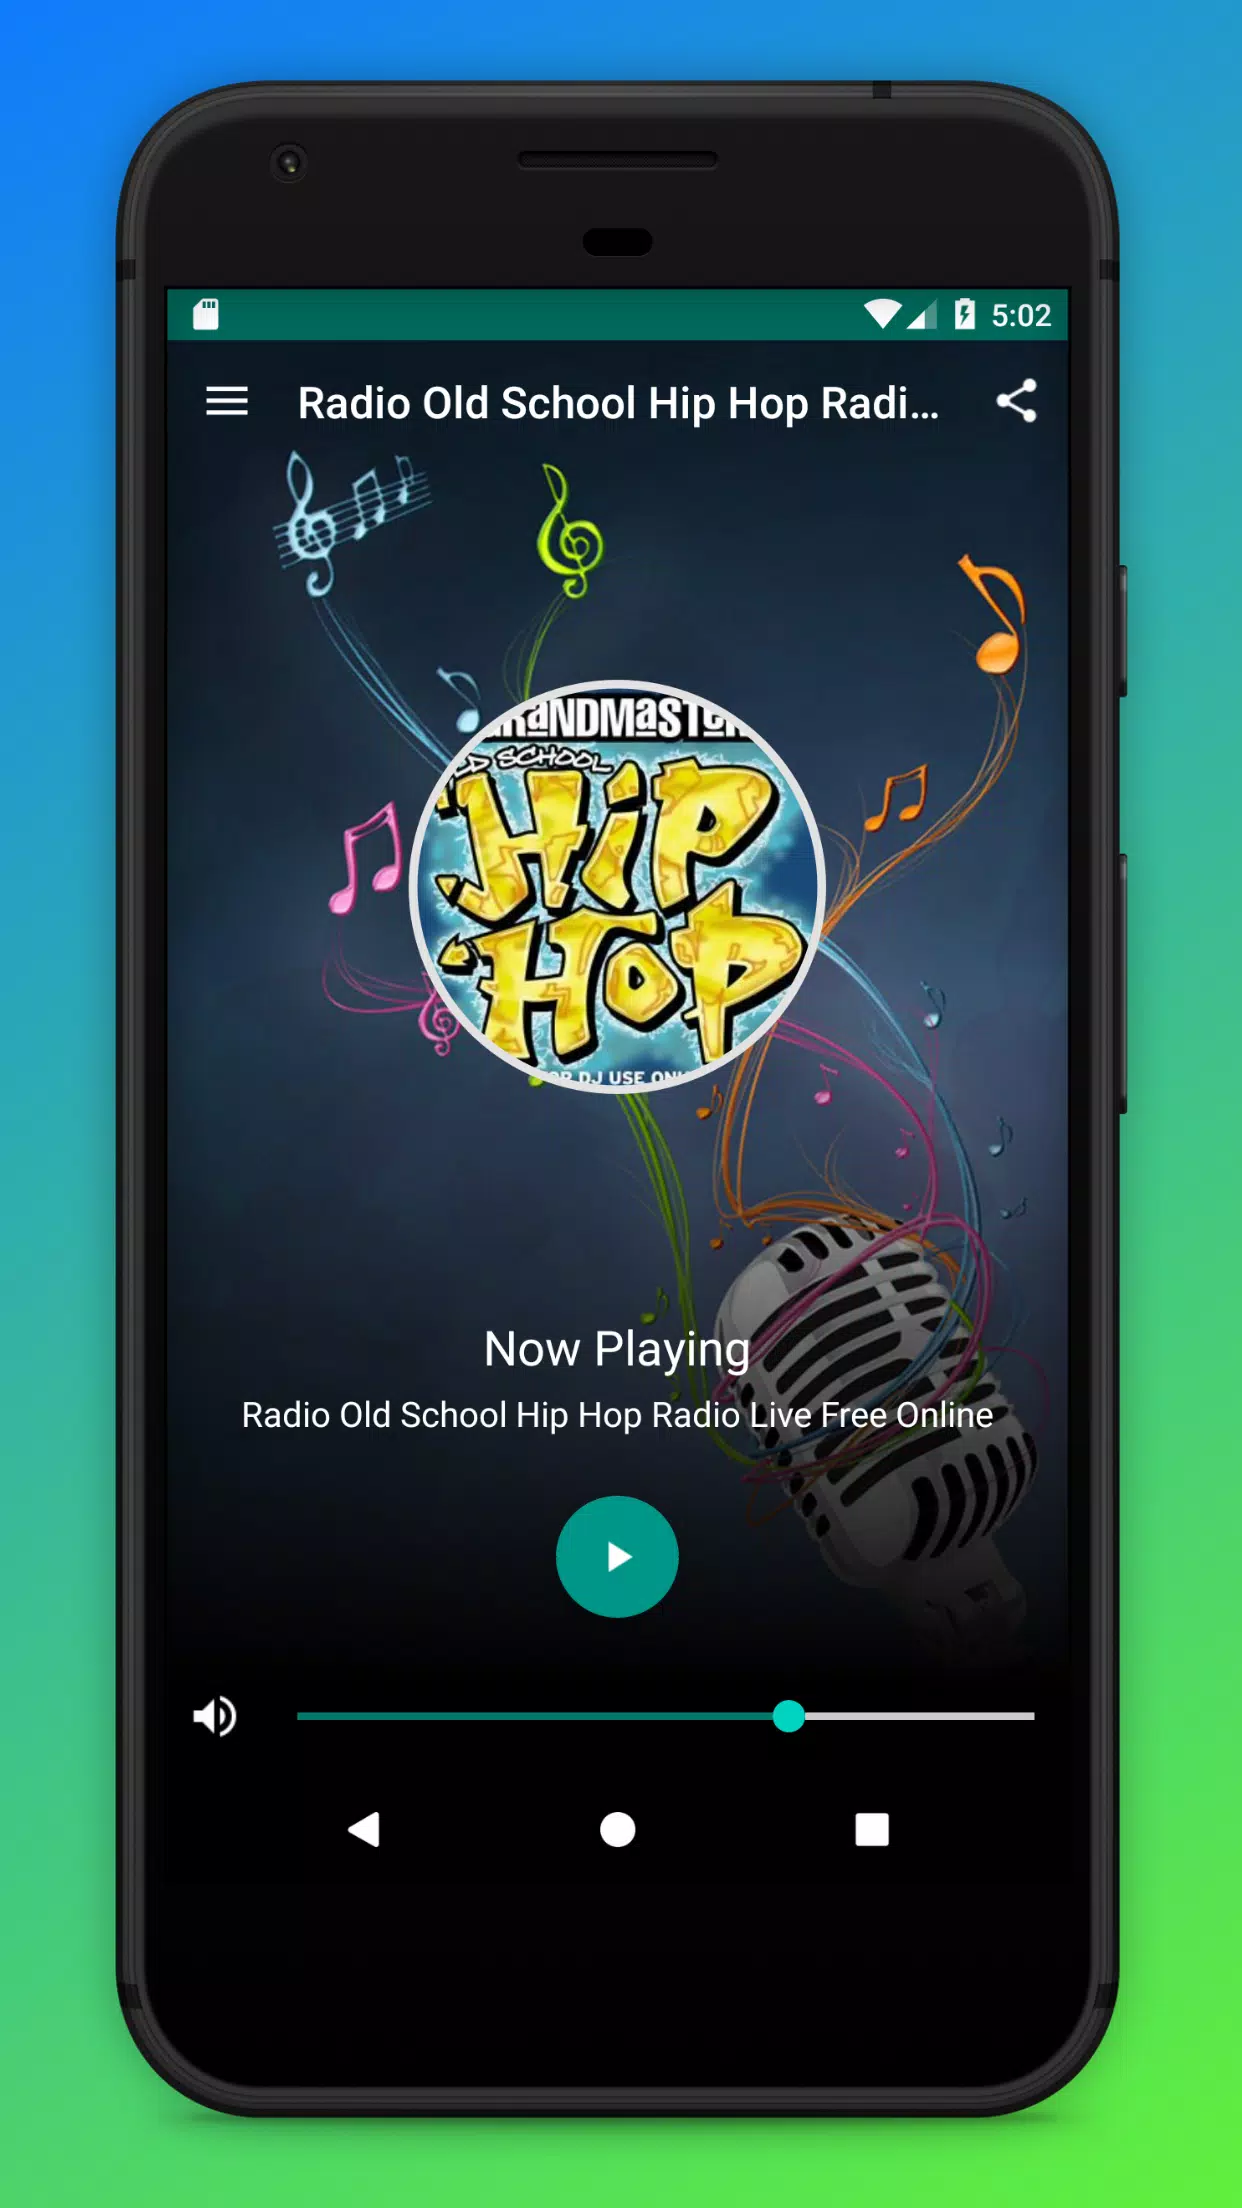 Radio Old School Hip Hop Radio USA + Free Online for Android - APK Download